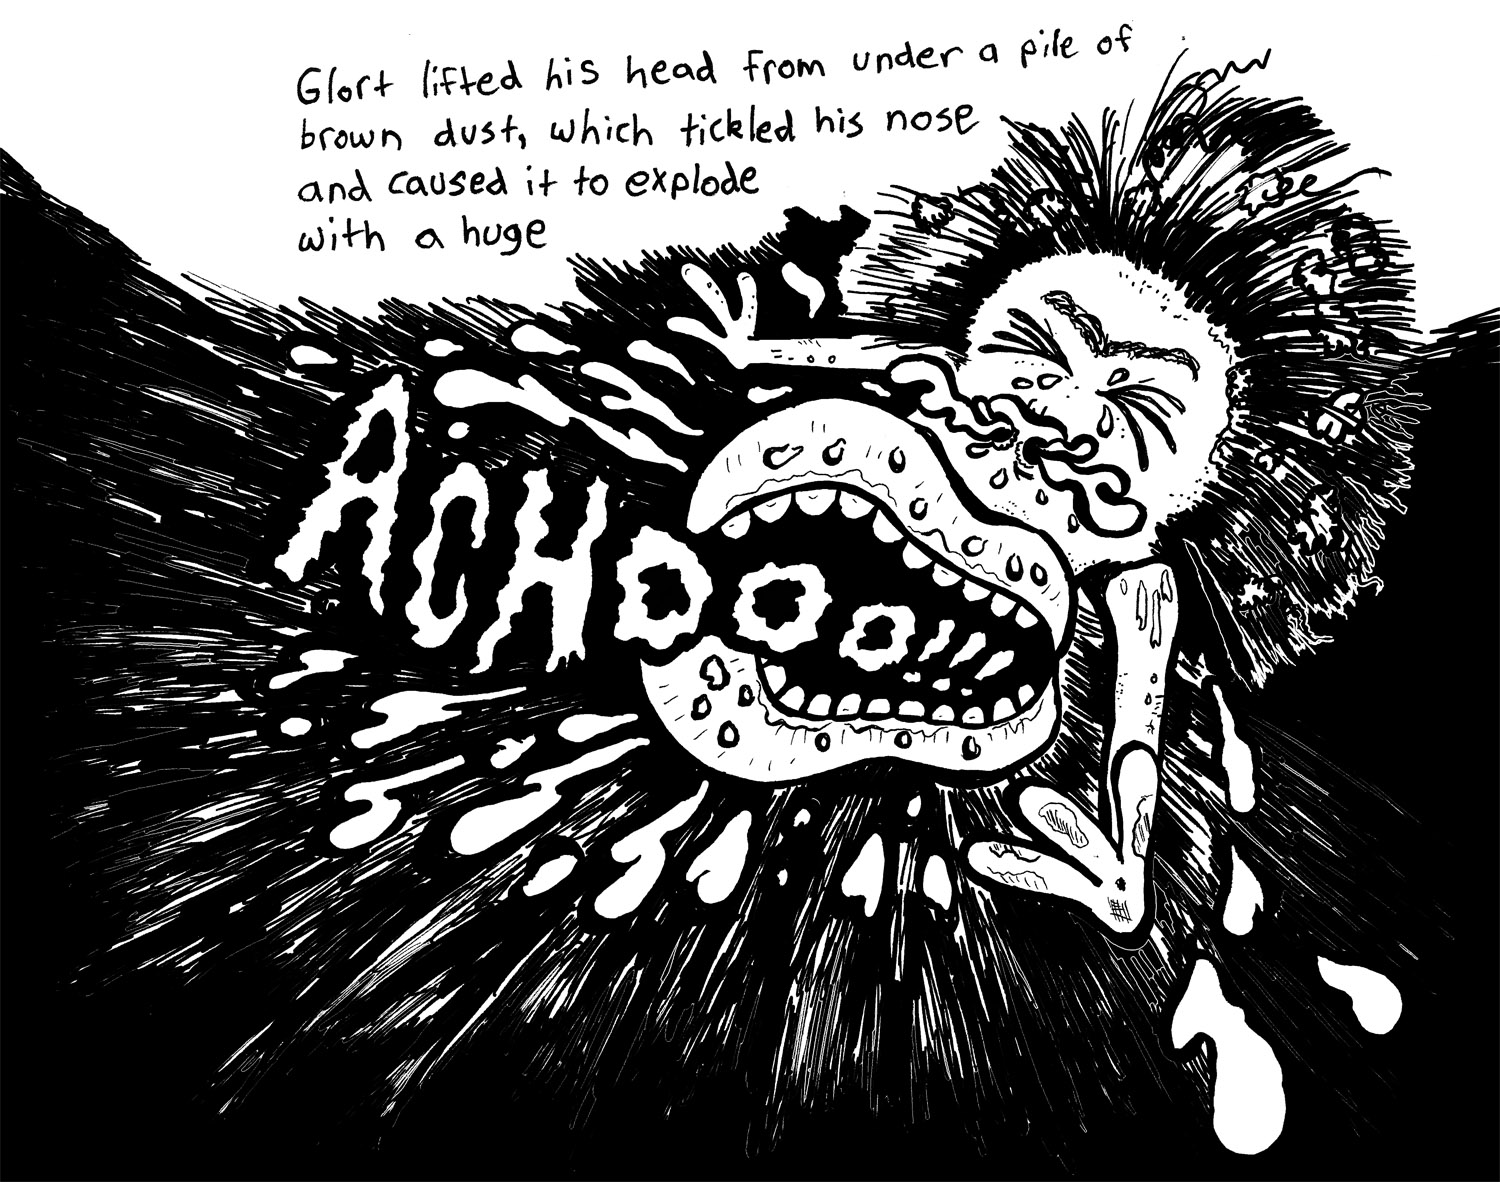 Twin Cities childrens book illustrator Josh Wallace, "Zgweebleville" Story by Josh Wallace and Jena Wallace, illustrations by Josh Wallace, ink on paper - Glort sneezing